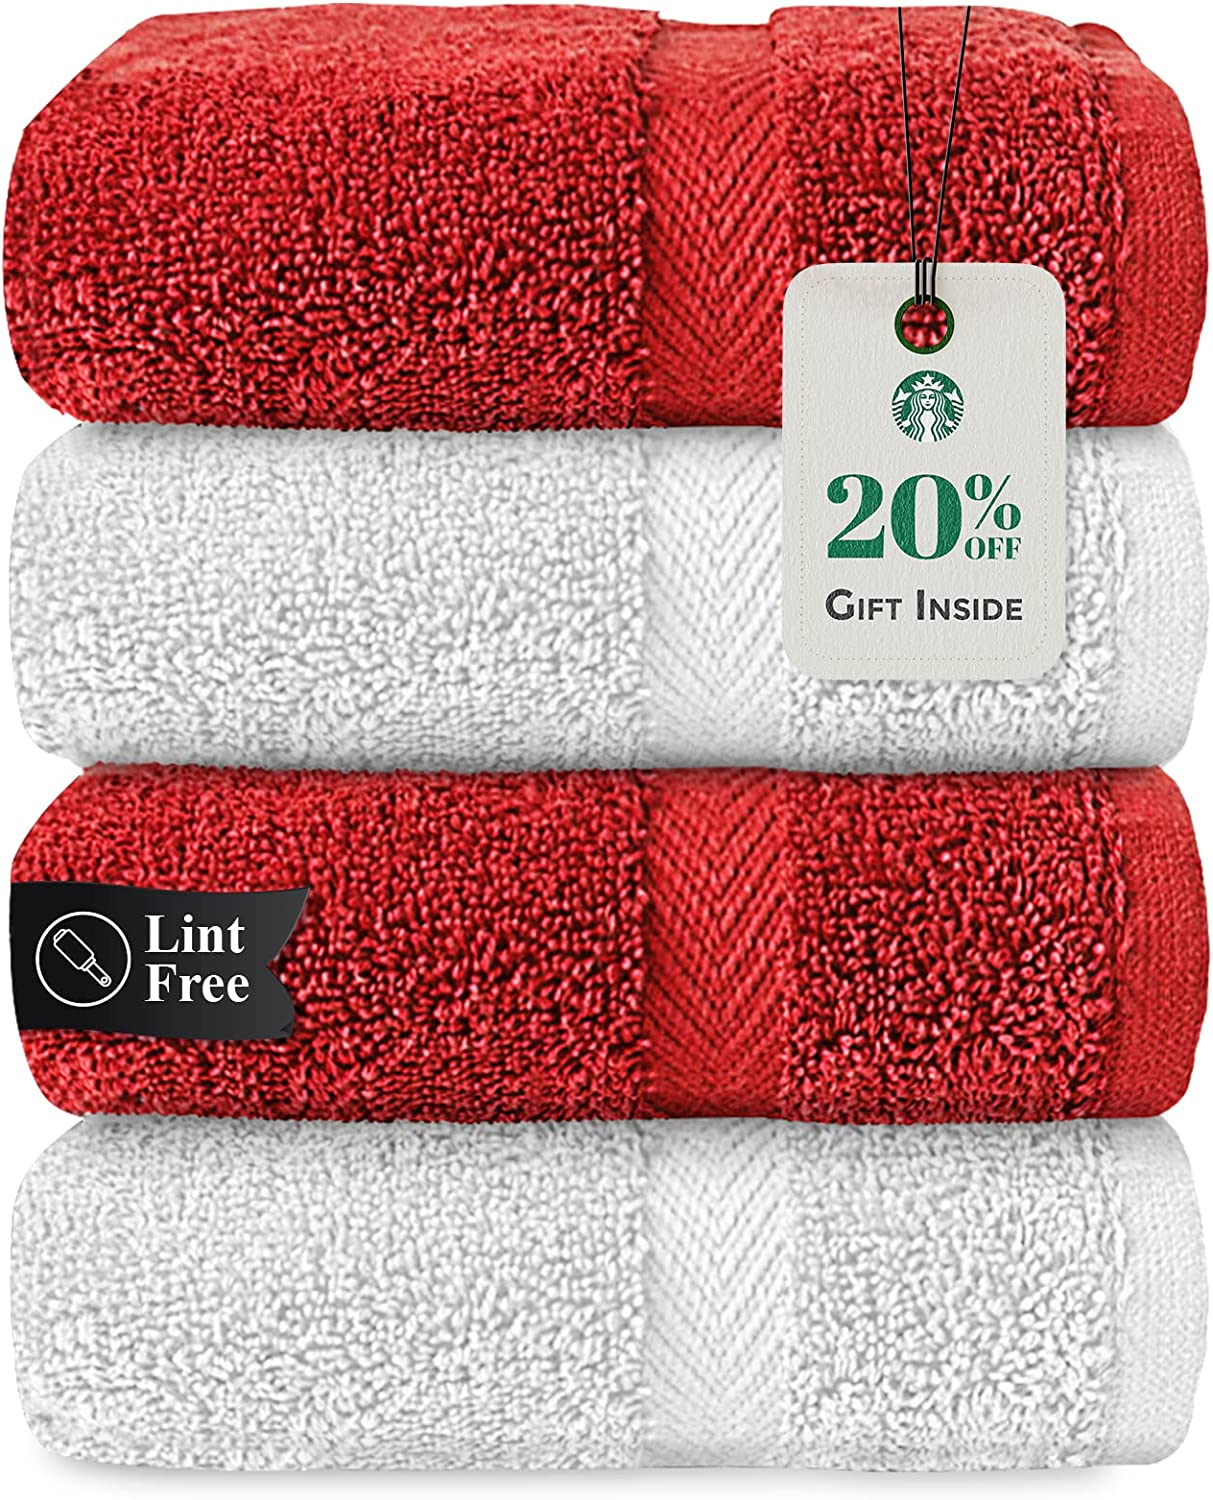 Stony Edge Towel Set, 1 Bath Towel, 1 Hand Towel & 2 Face Towels, 100% Cotton, 600 GSM, Soft & Absorbent for Bathroom, Kitchen, Gym & Spa, Maroon